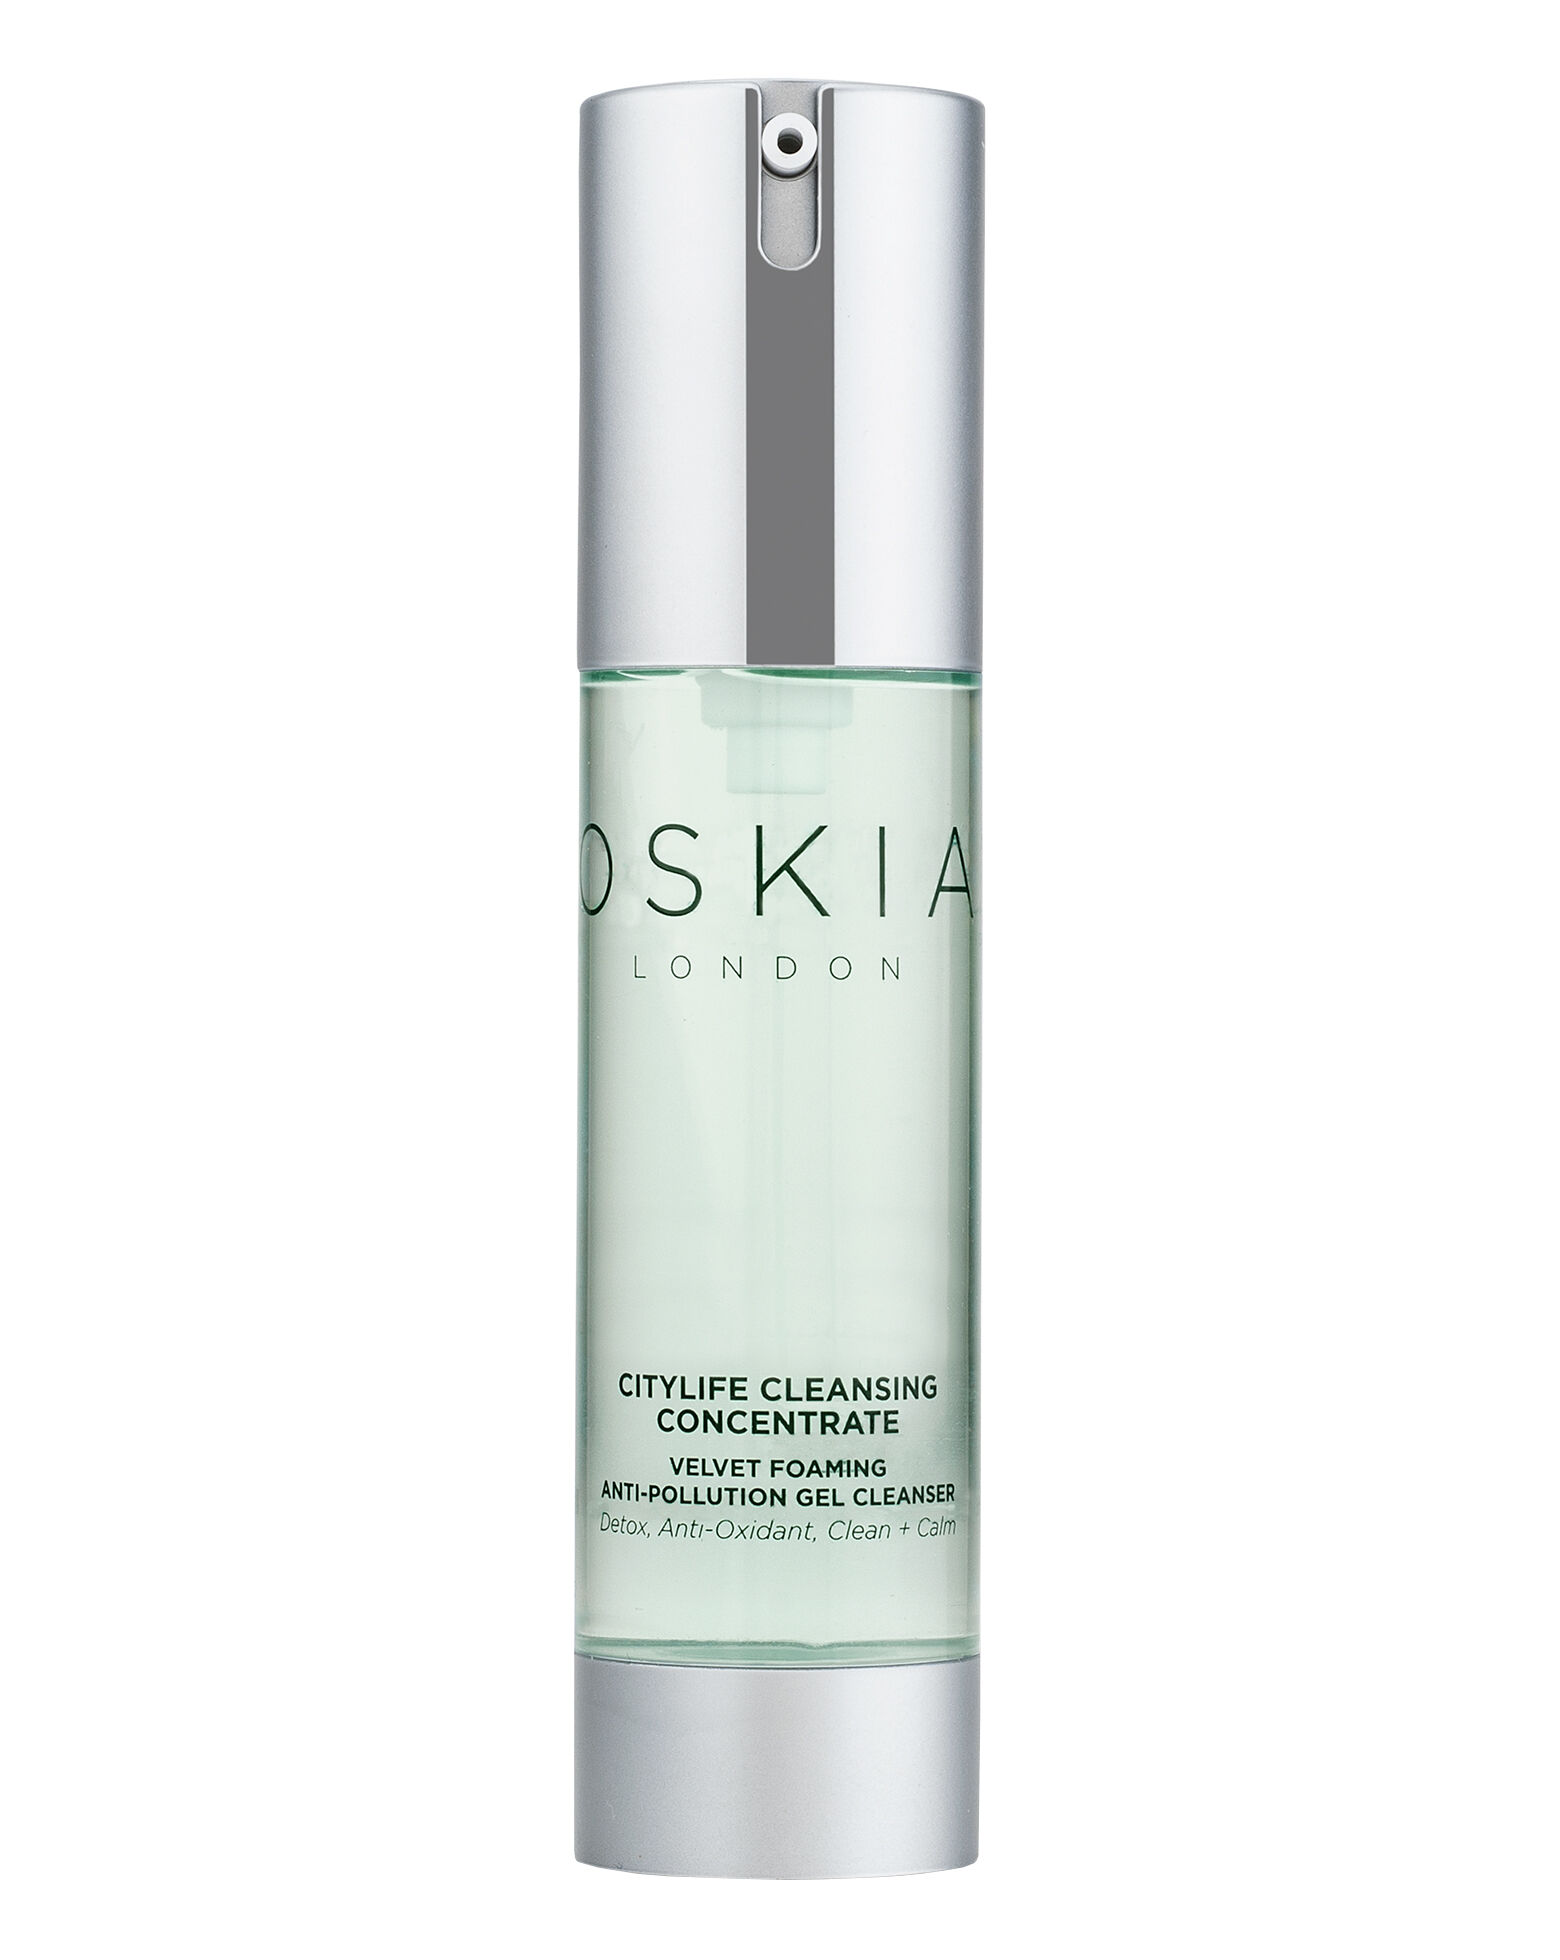 OSKIA - Citylife Cleansing Concentrate